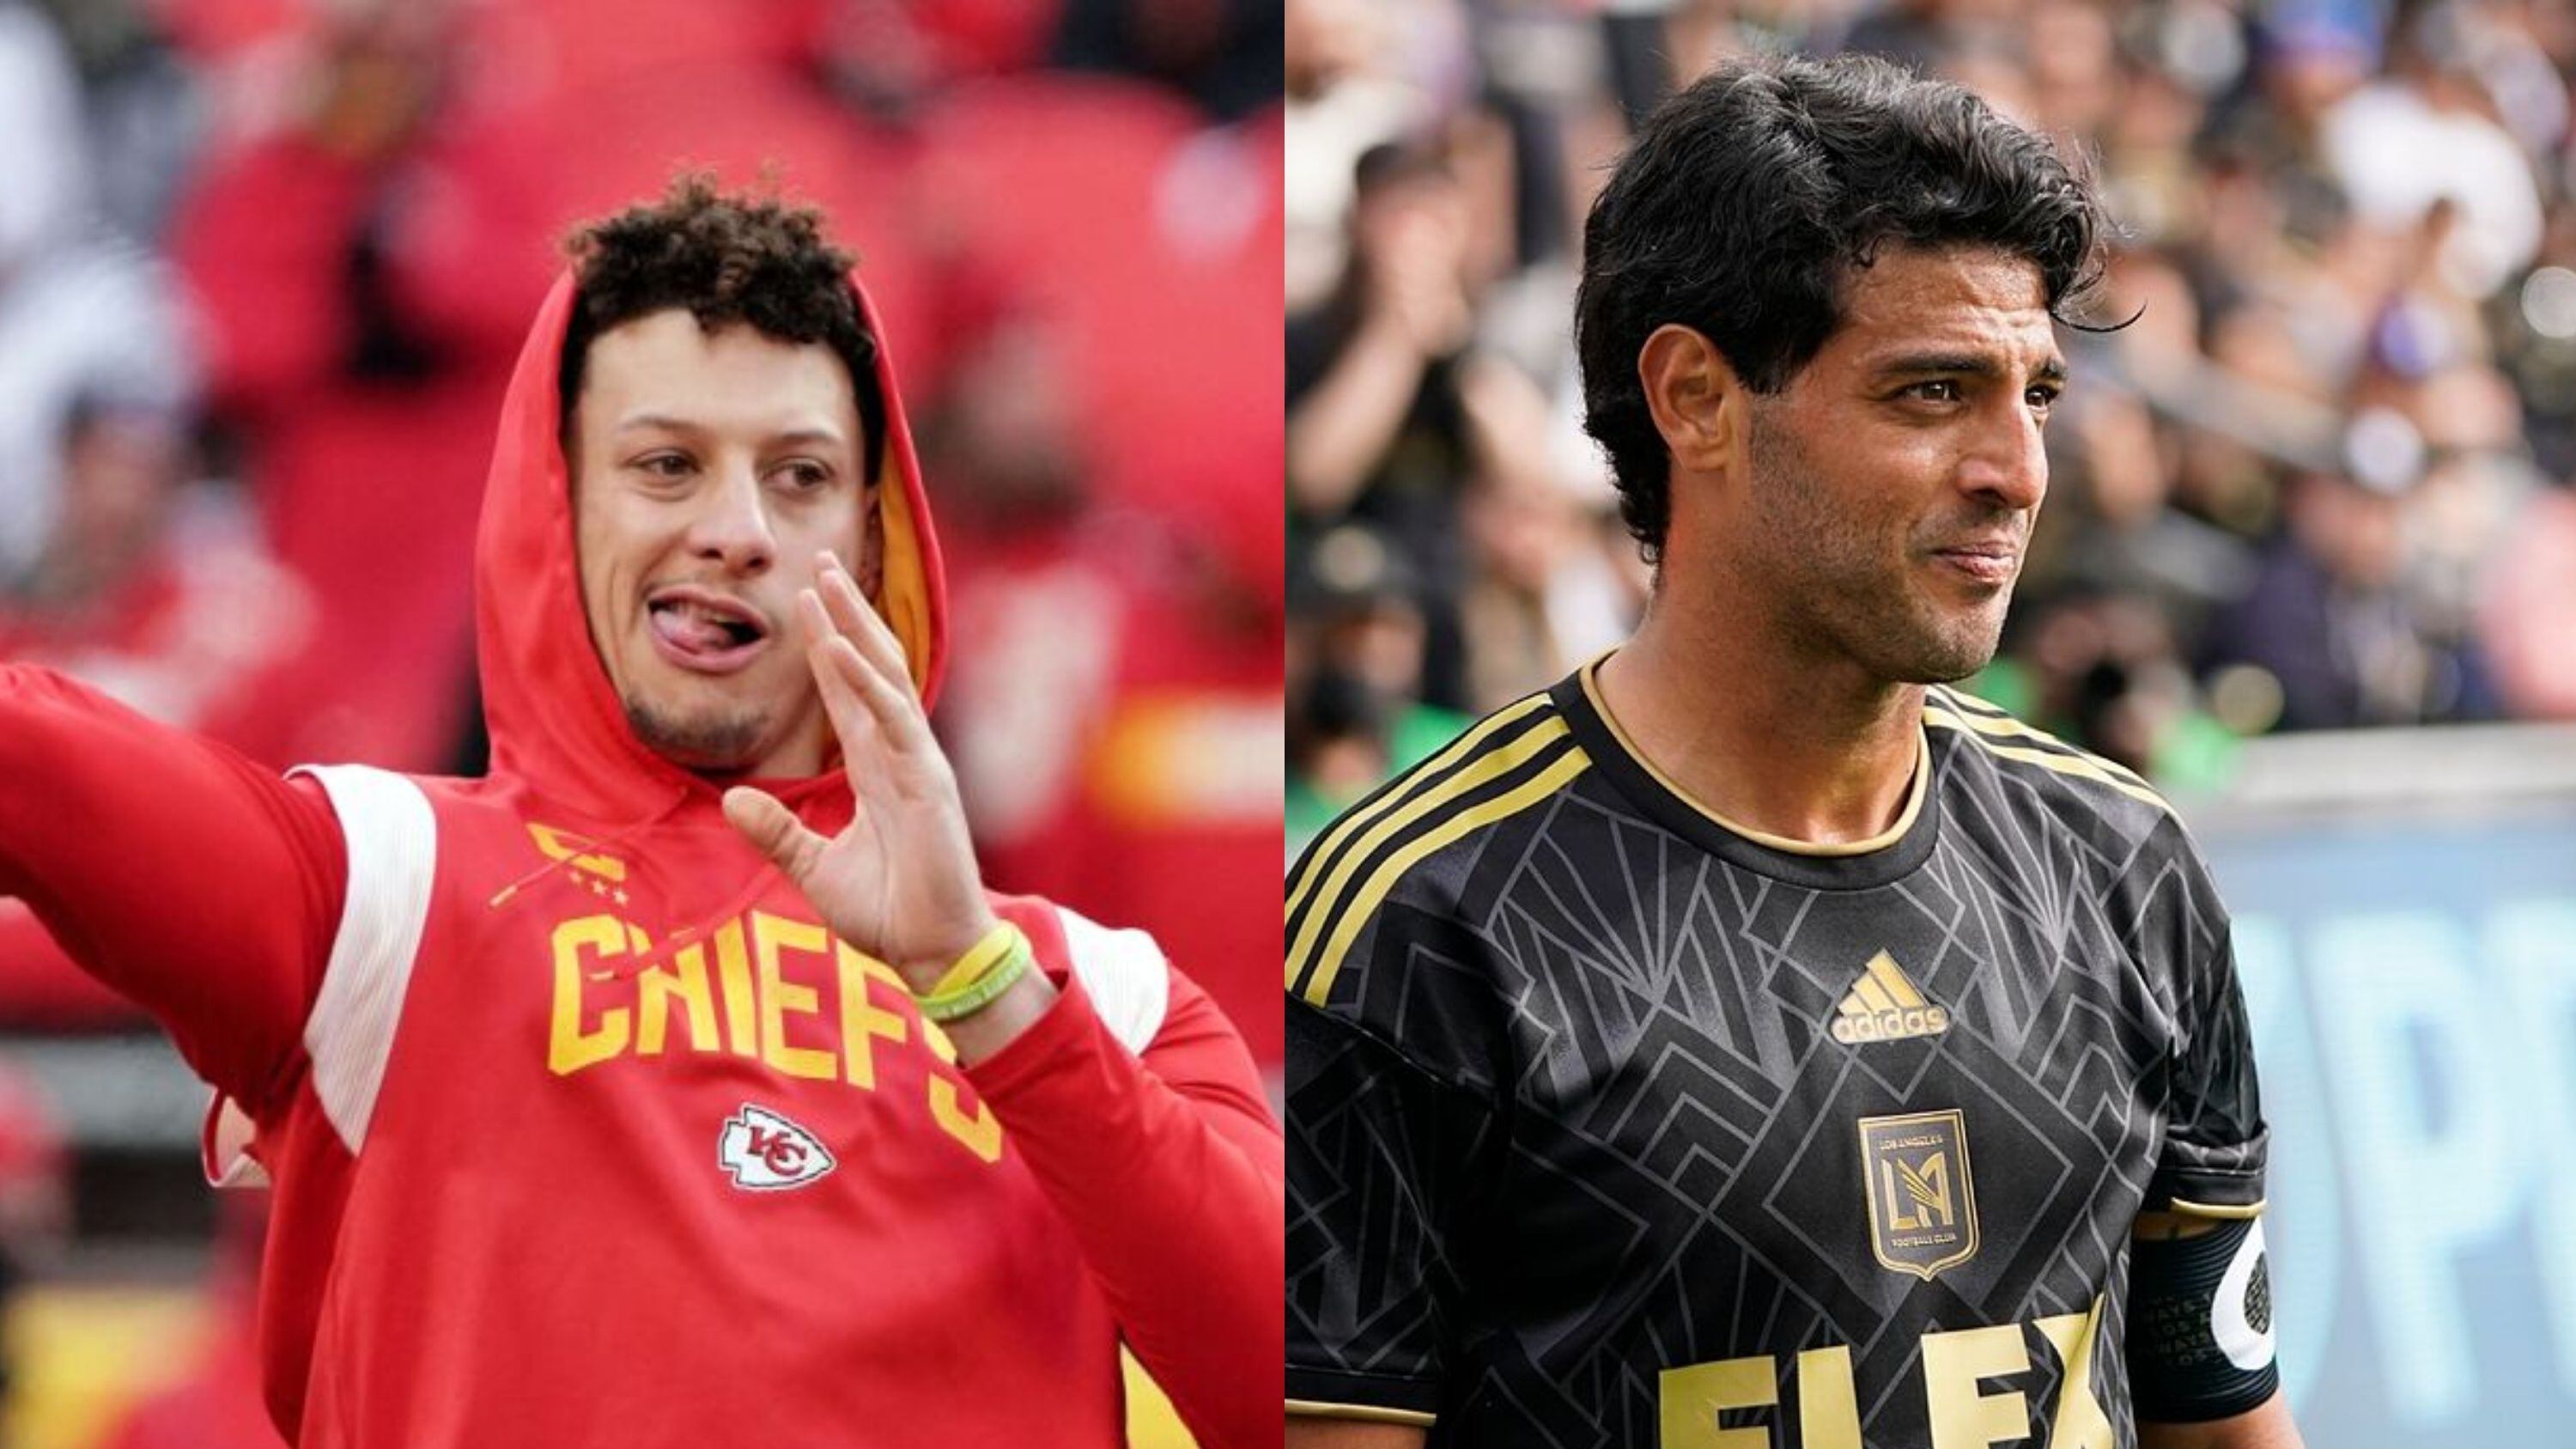 While Super Bowl LVII star Mahomes has $40 million, the fortune of Carlos Vela